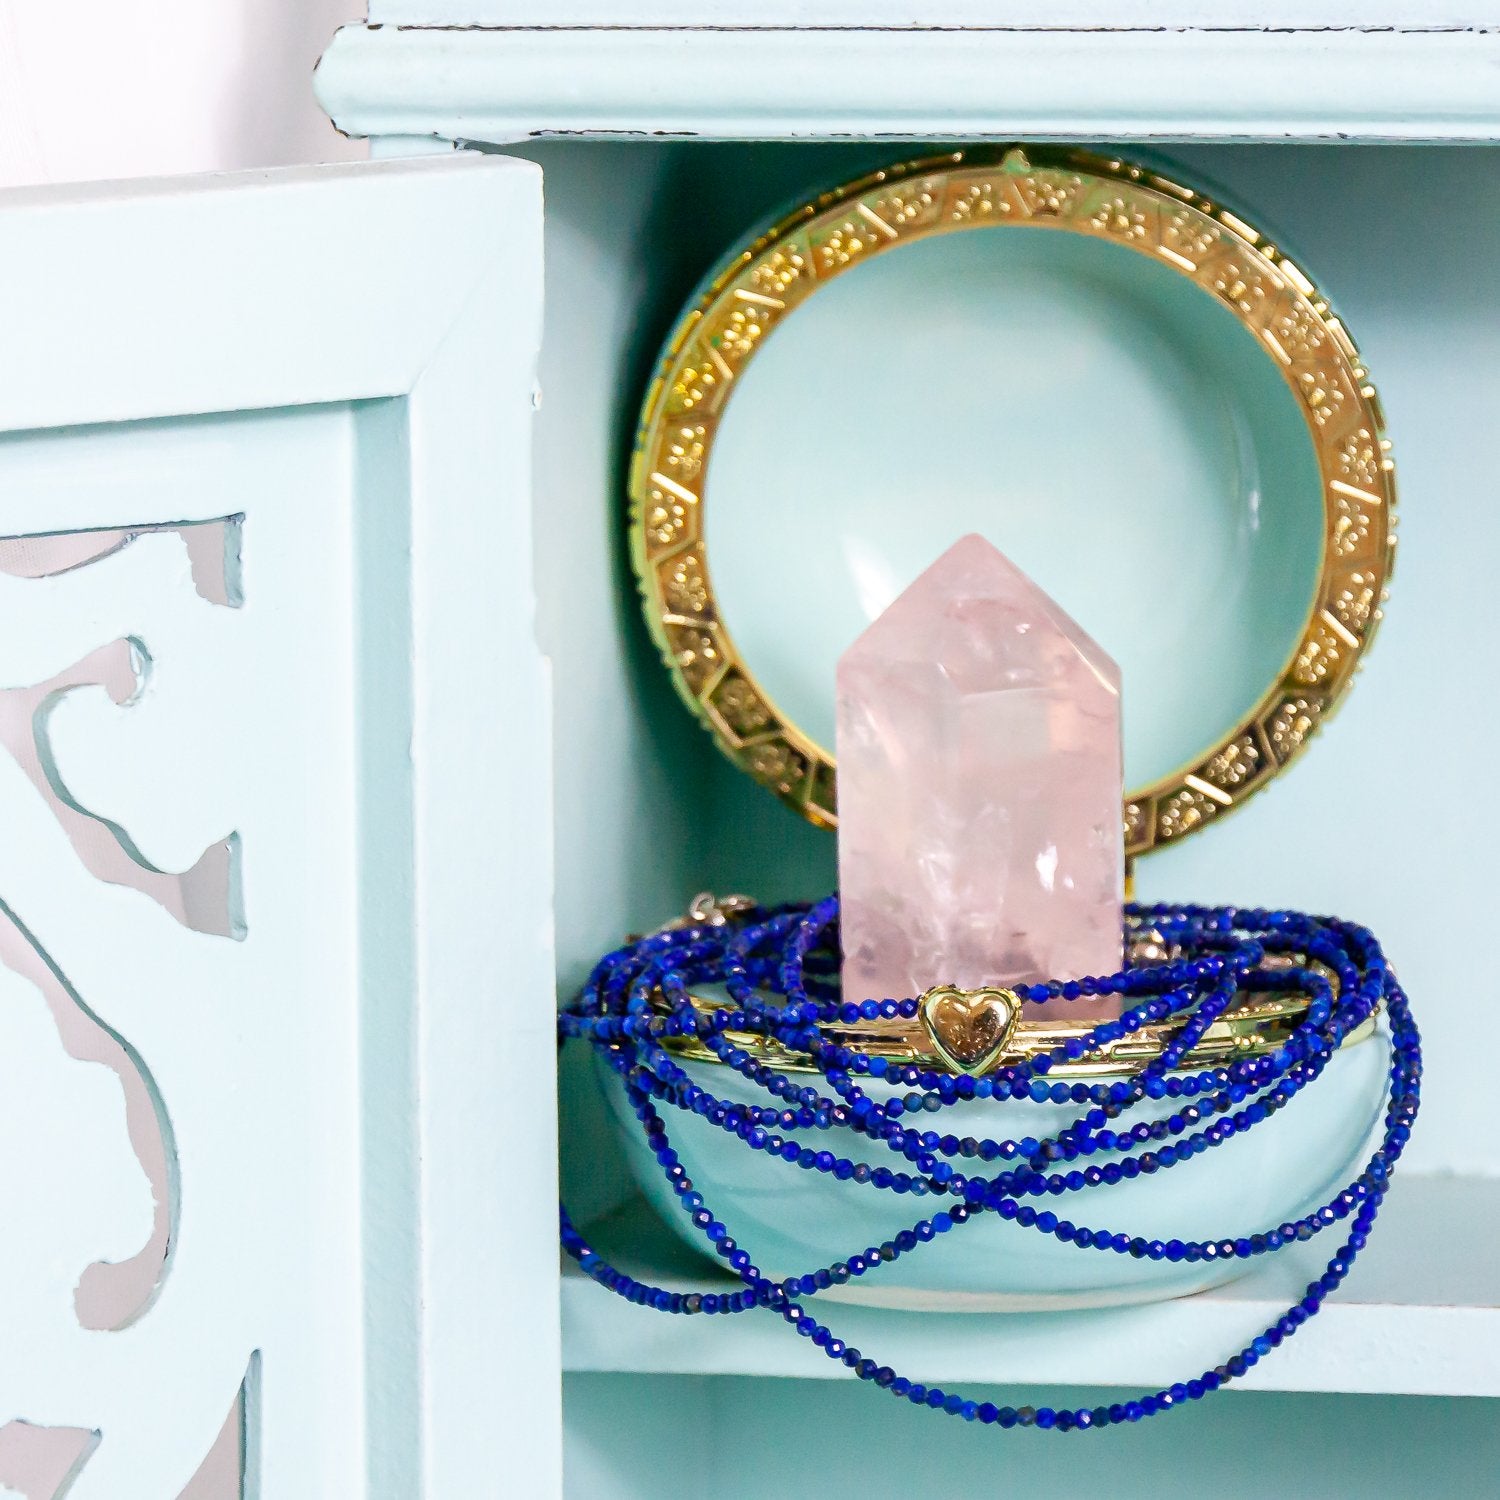 1mm lapis lazuli faceted crystal necklace around rose quartz point, inside jewelry box. all inside cabinet. close-up.